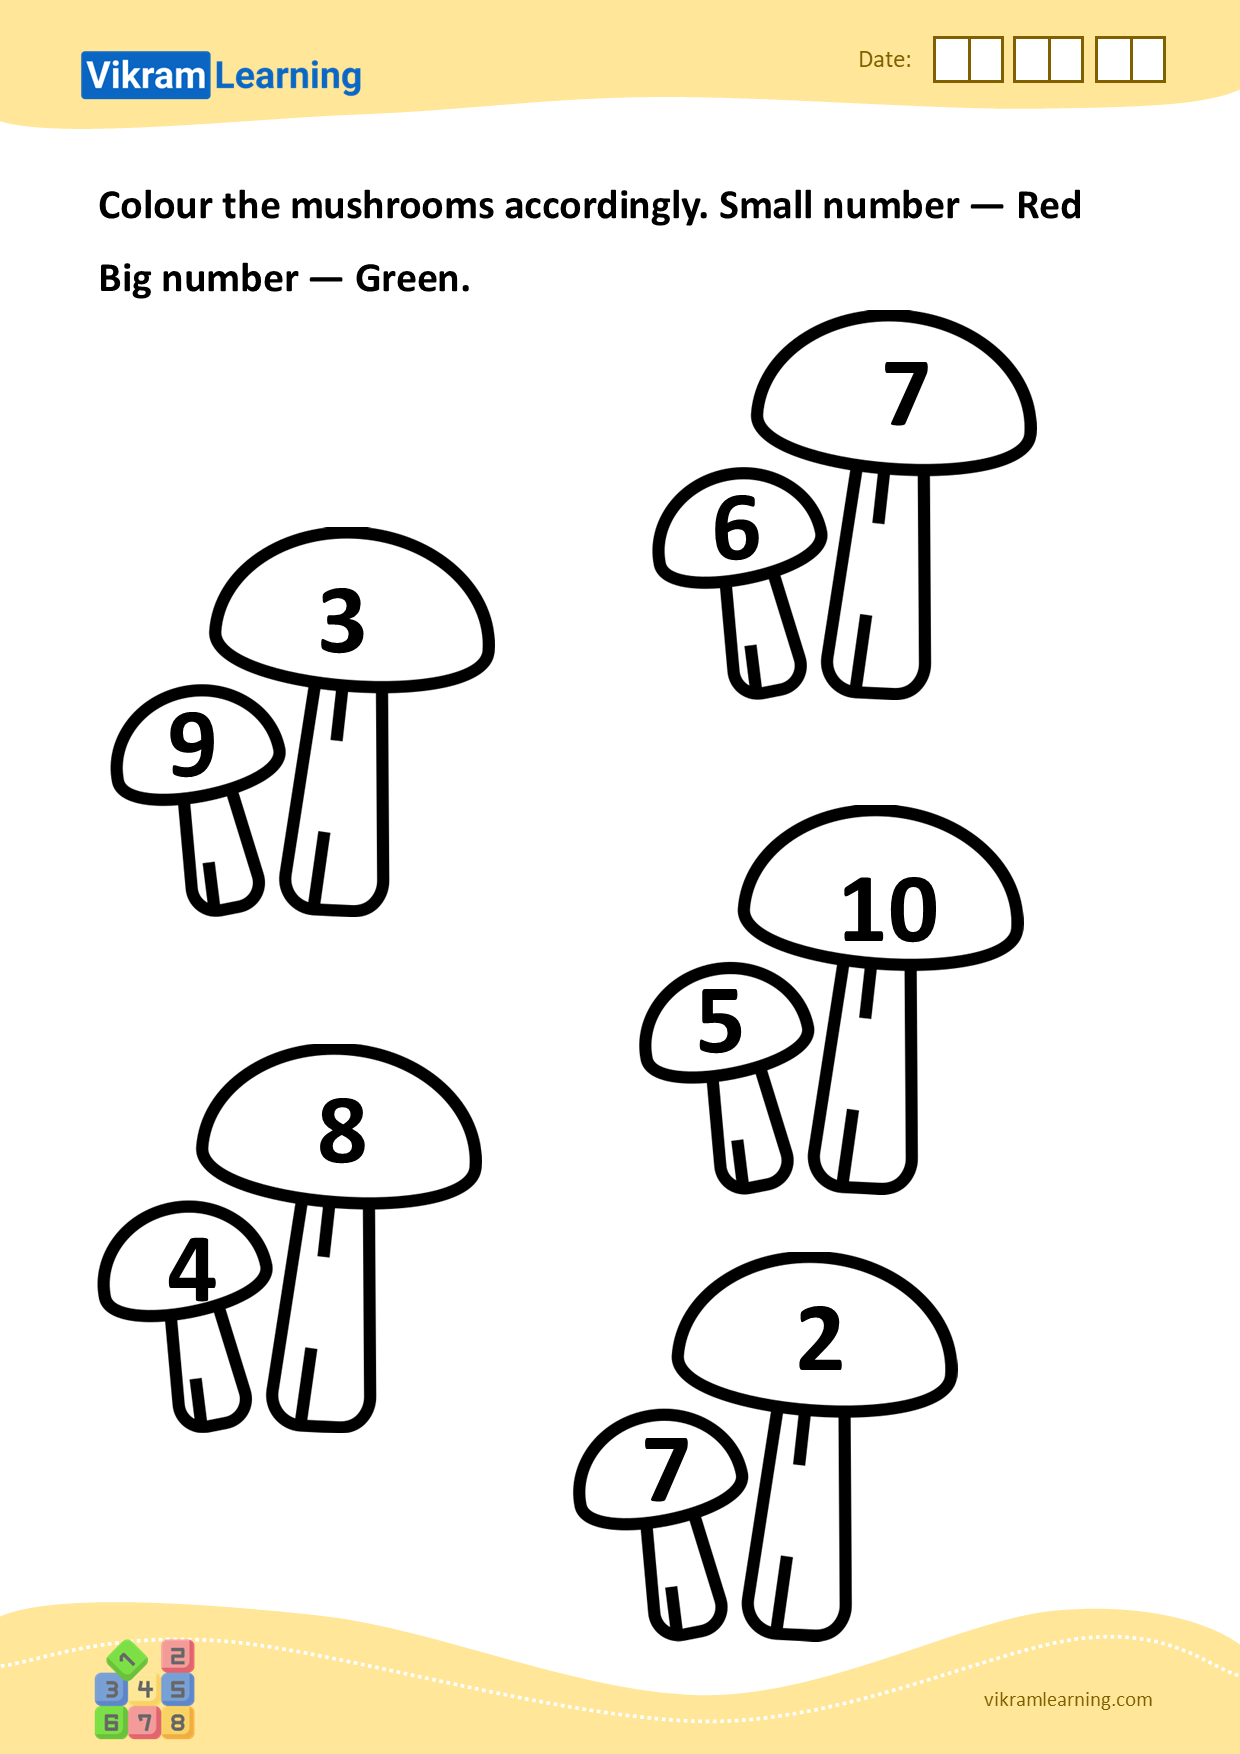 Download colour the mushrooms accordingly. small number — red
big number — green. worksheets